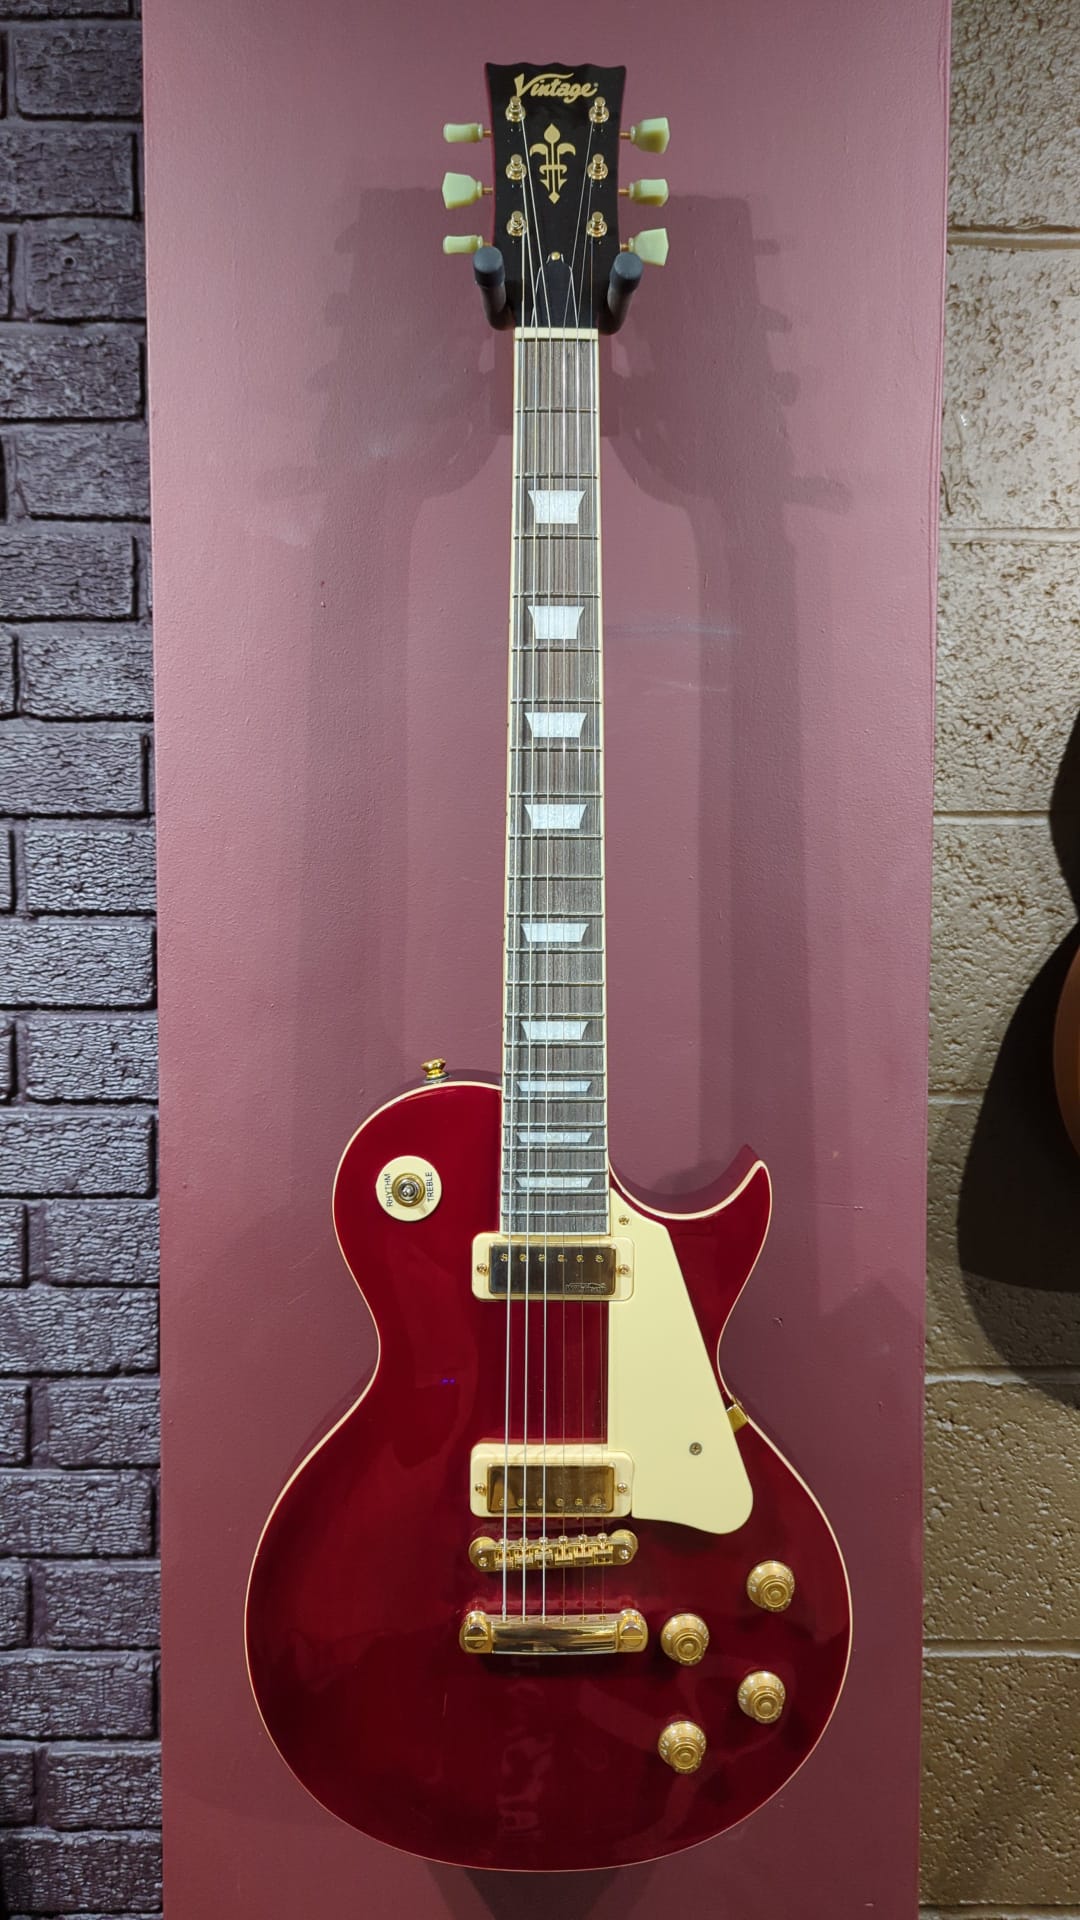 Vintage* V100M Wine Red Electric Guitar - Ex Display with 1 small scratch and missing switch tip (With FREE Vintage Custom Pro Upgrade worth £45), Electric Guitar for sale at Richards Guitars.